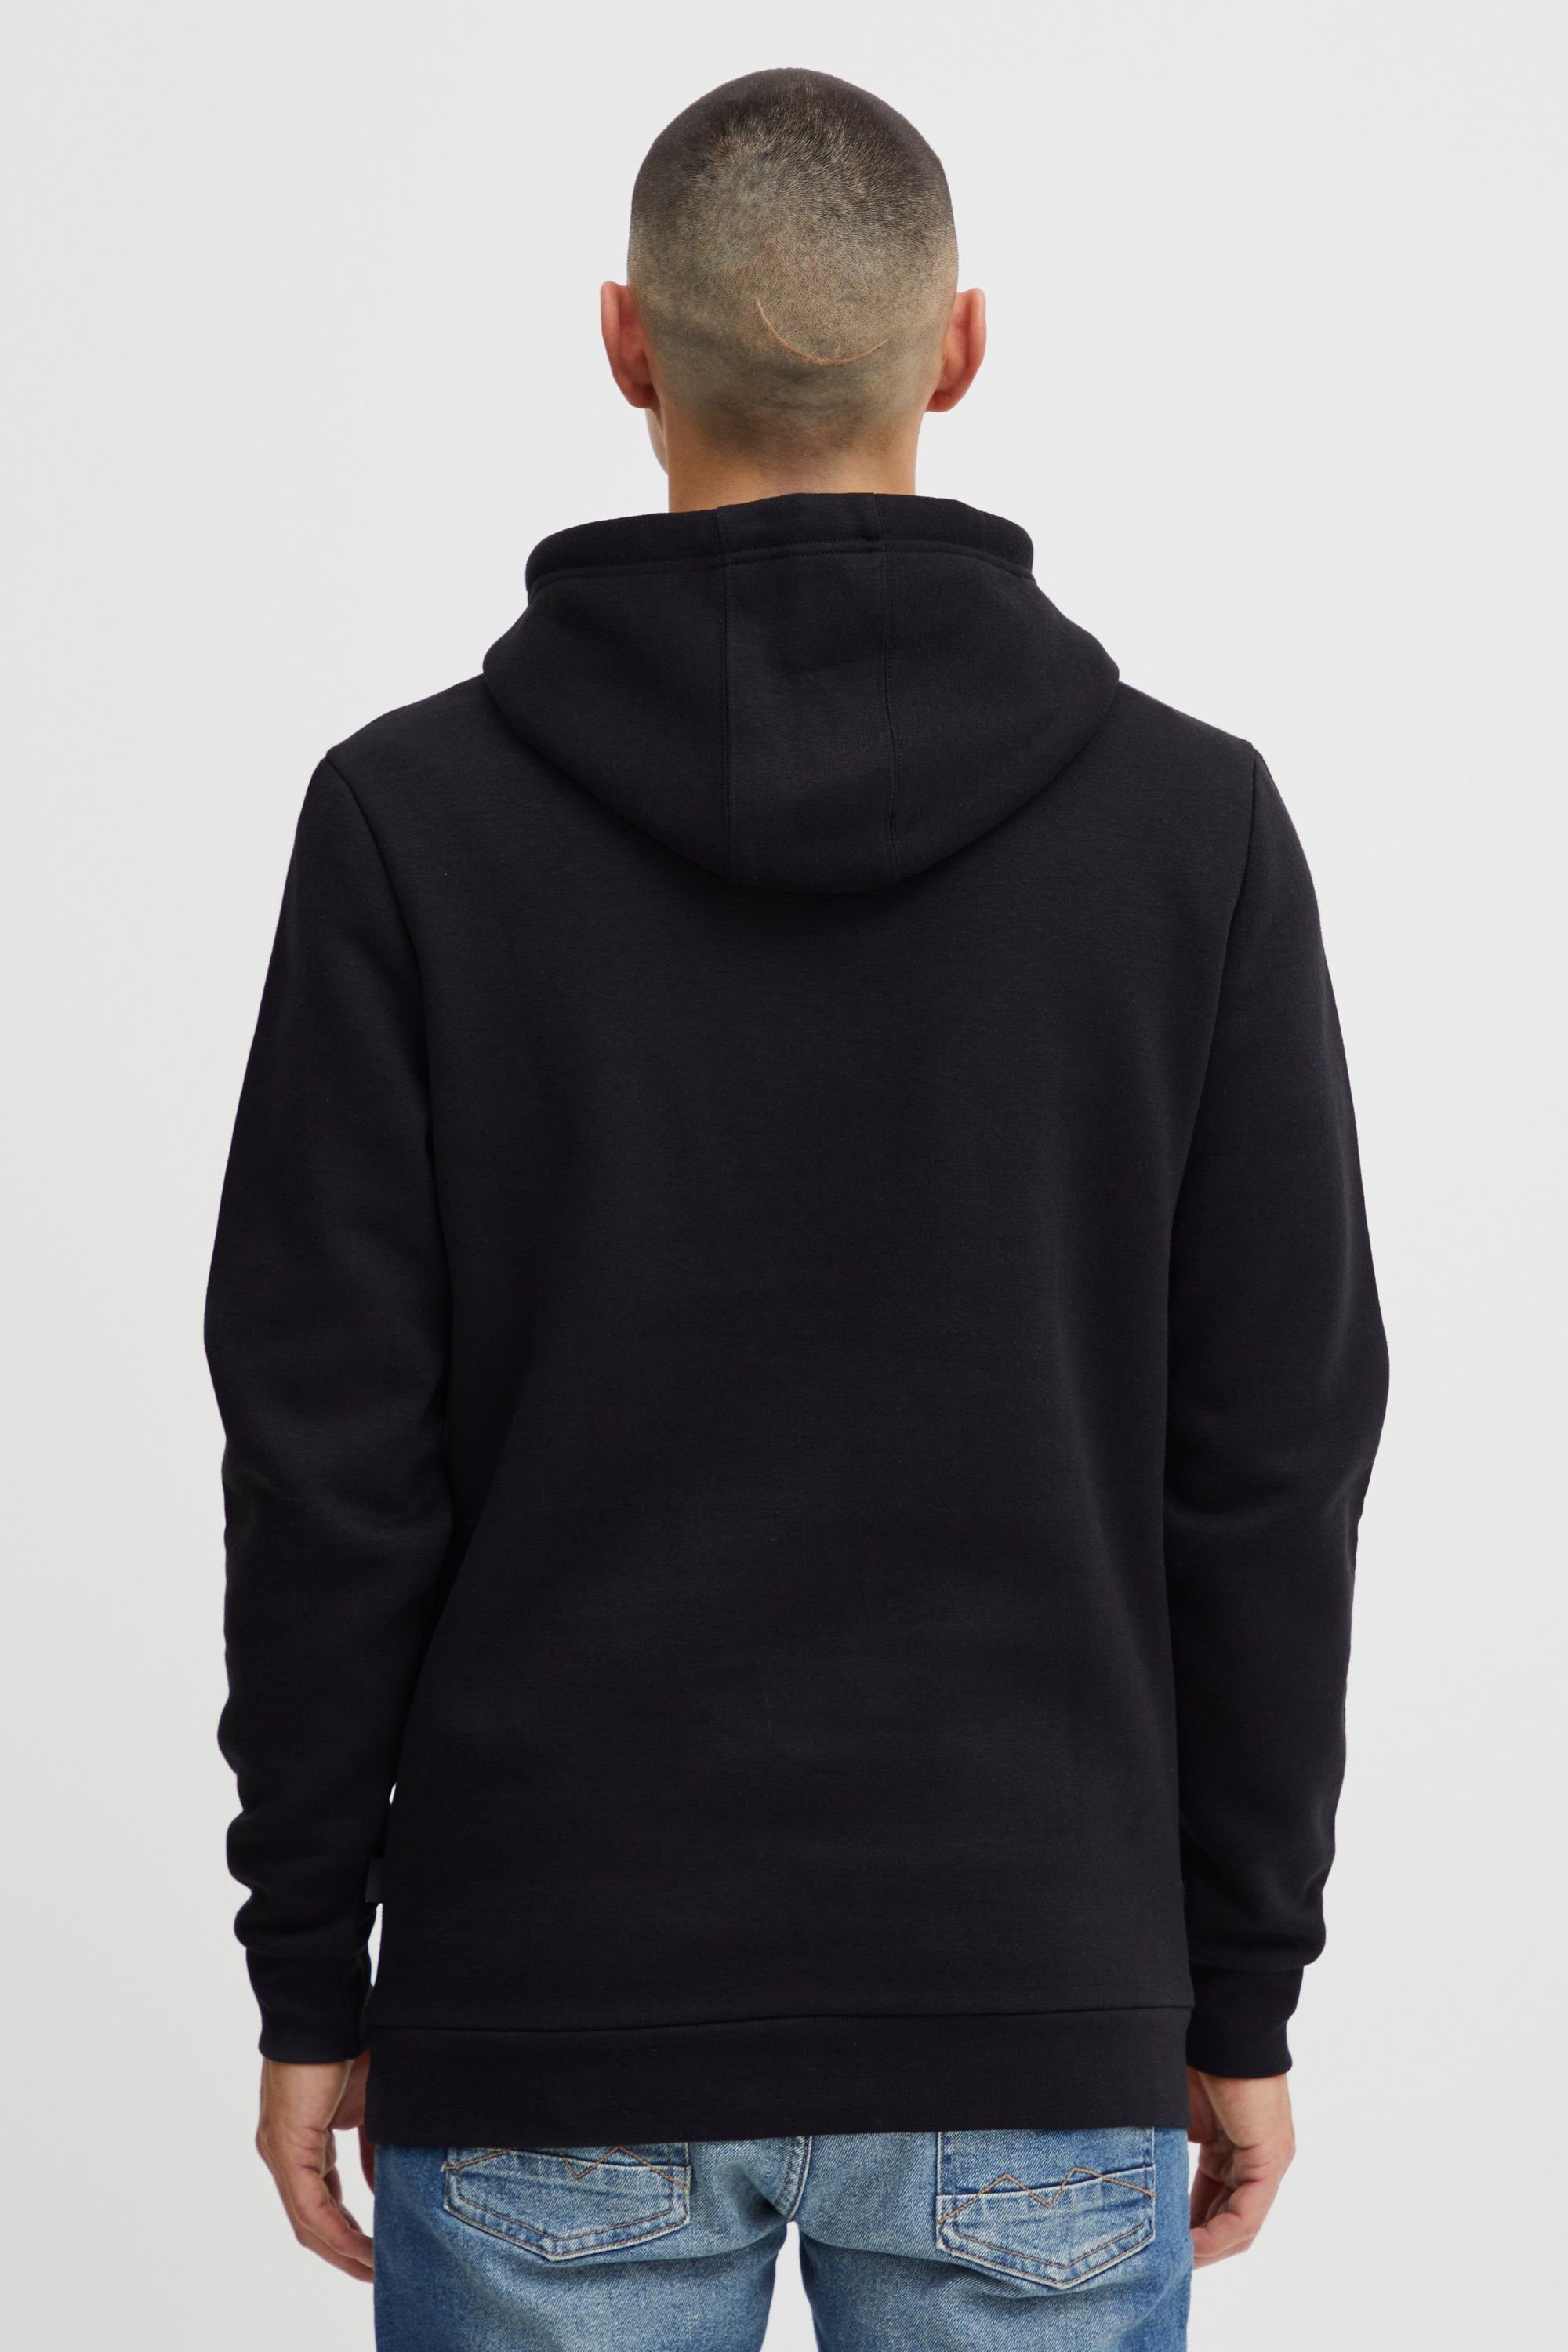 Project 11 Black PRAnno Project Hoodie 11